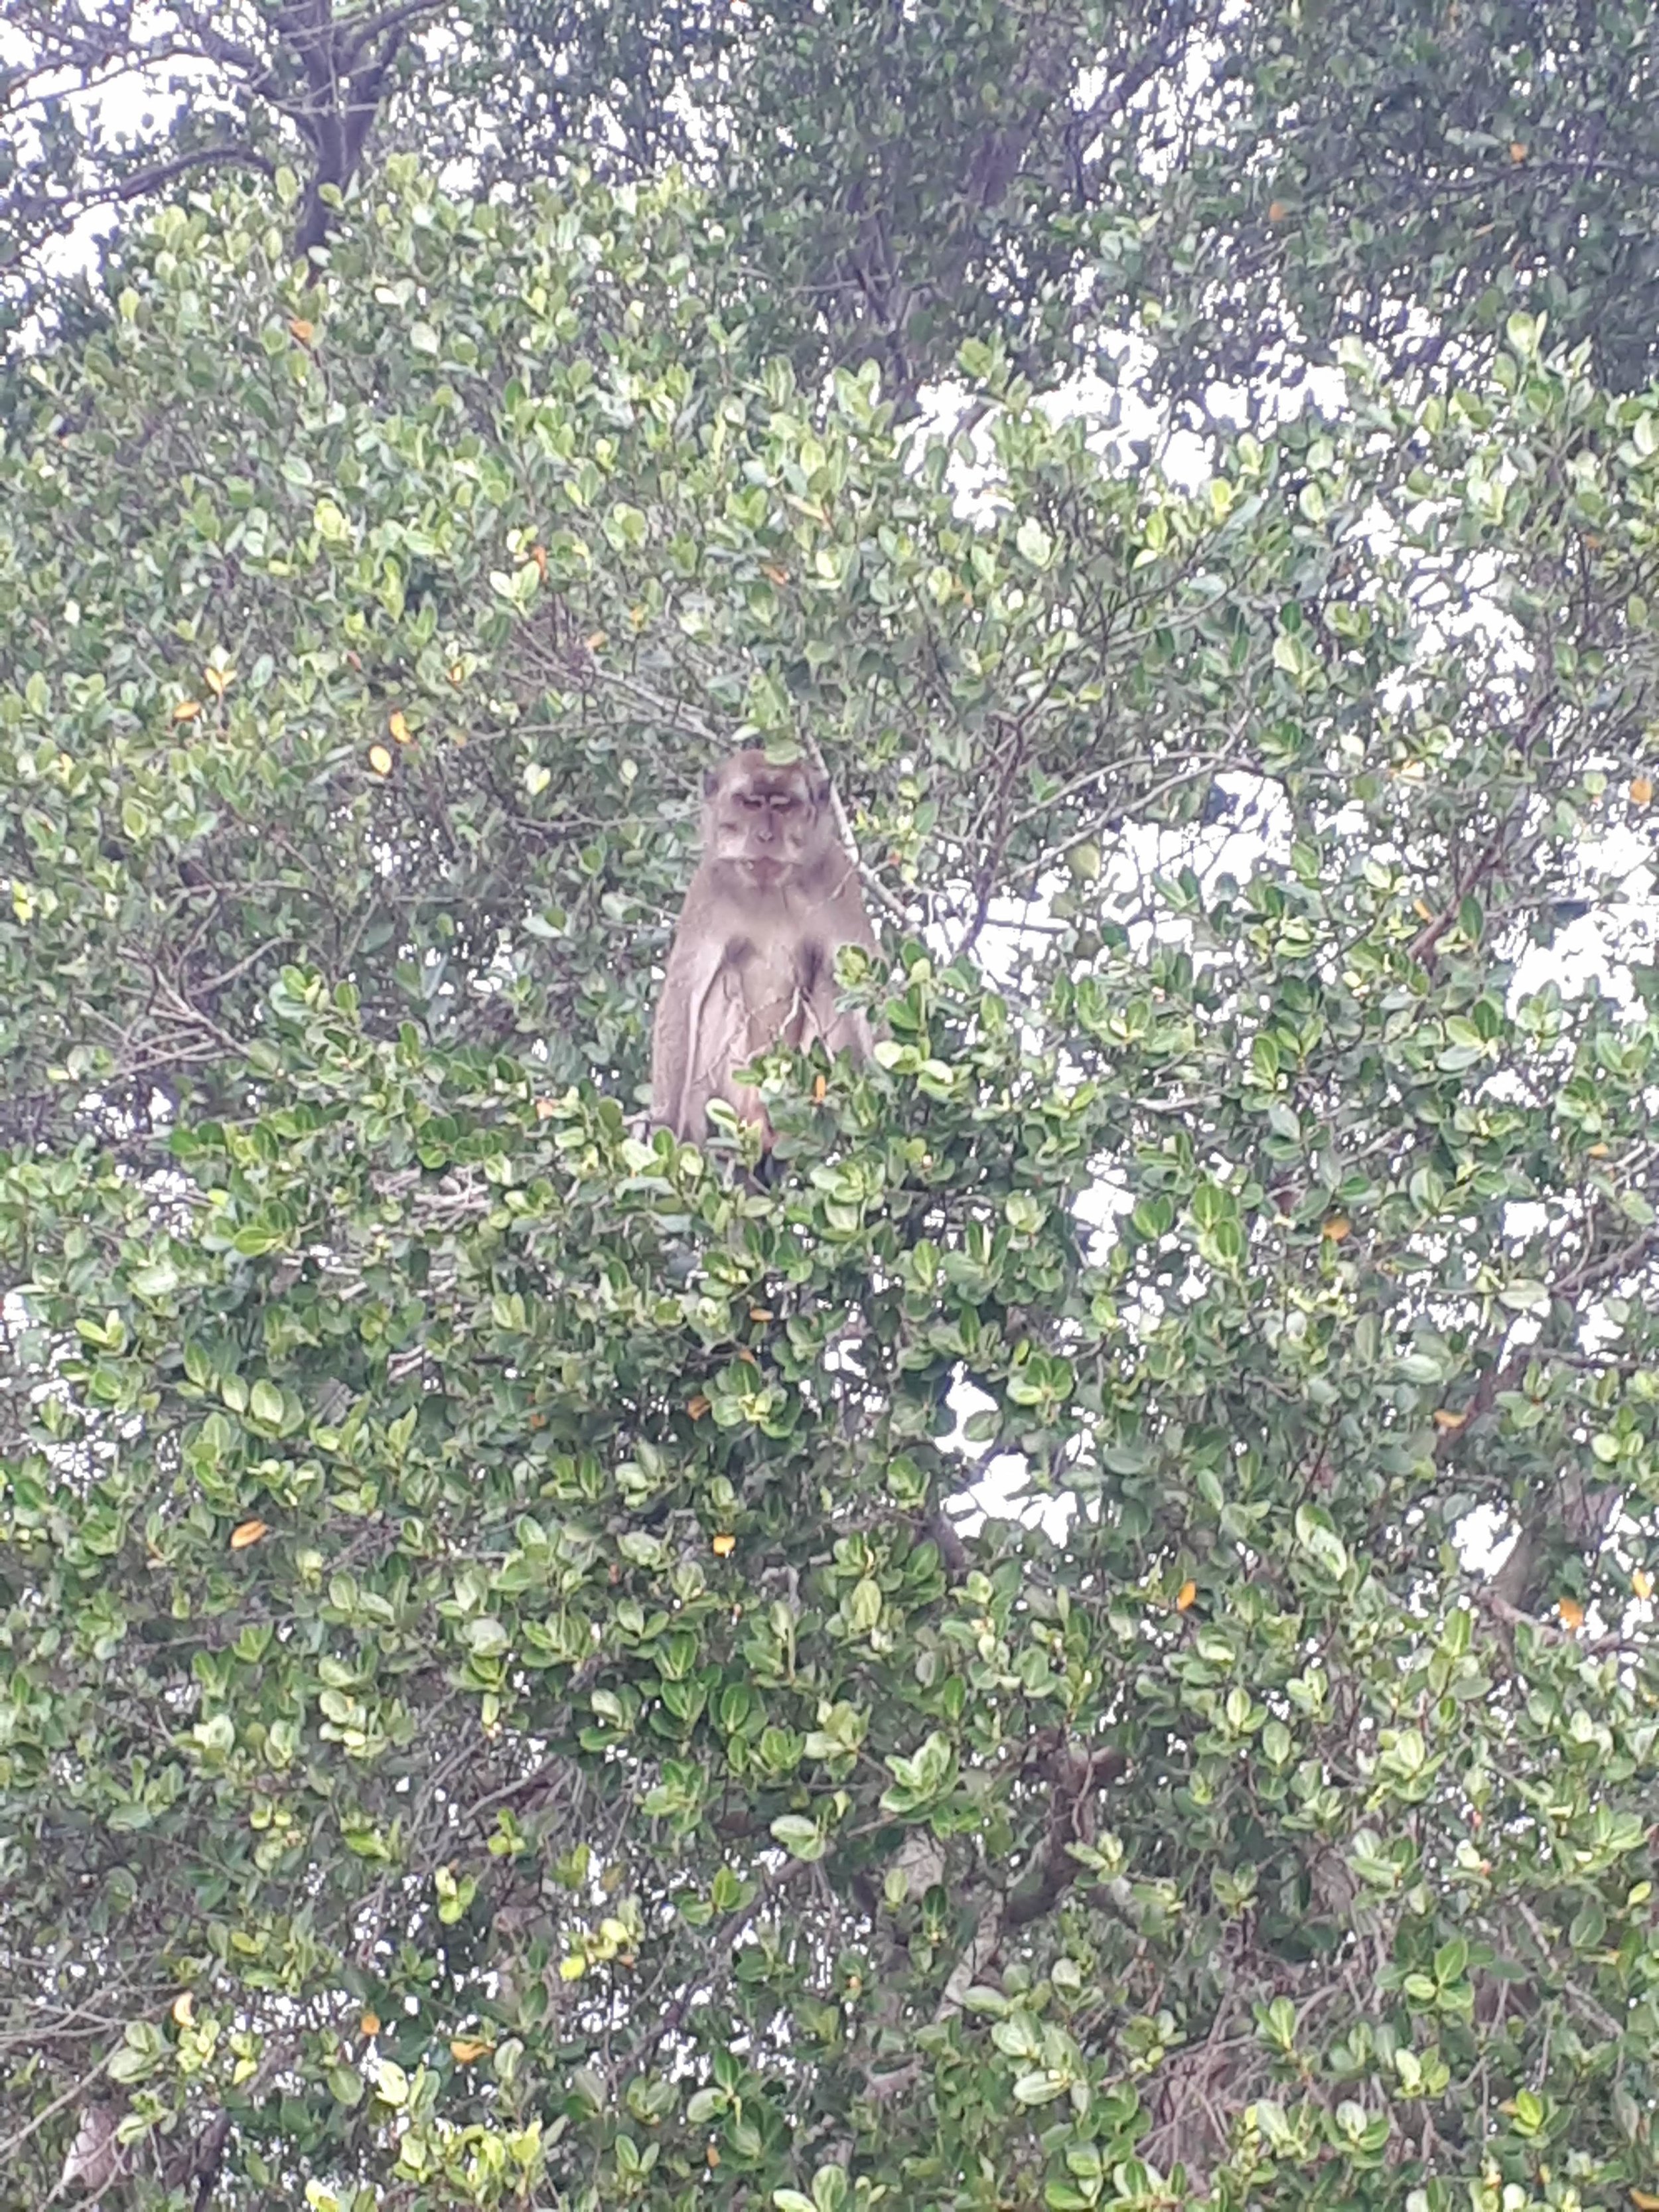 Macaque in the mangroves!